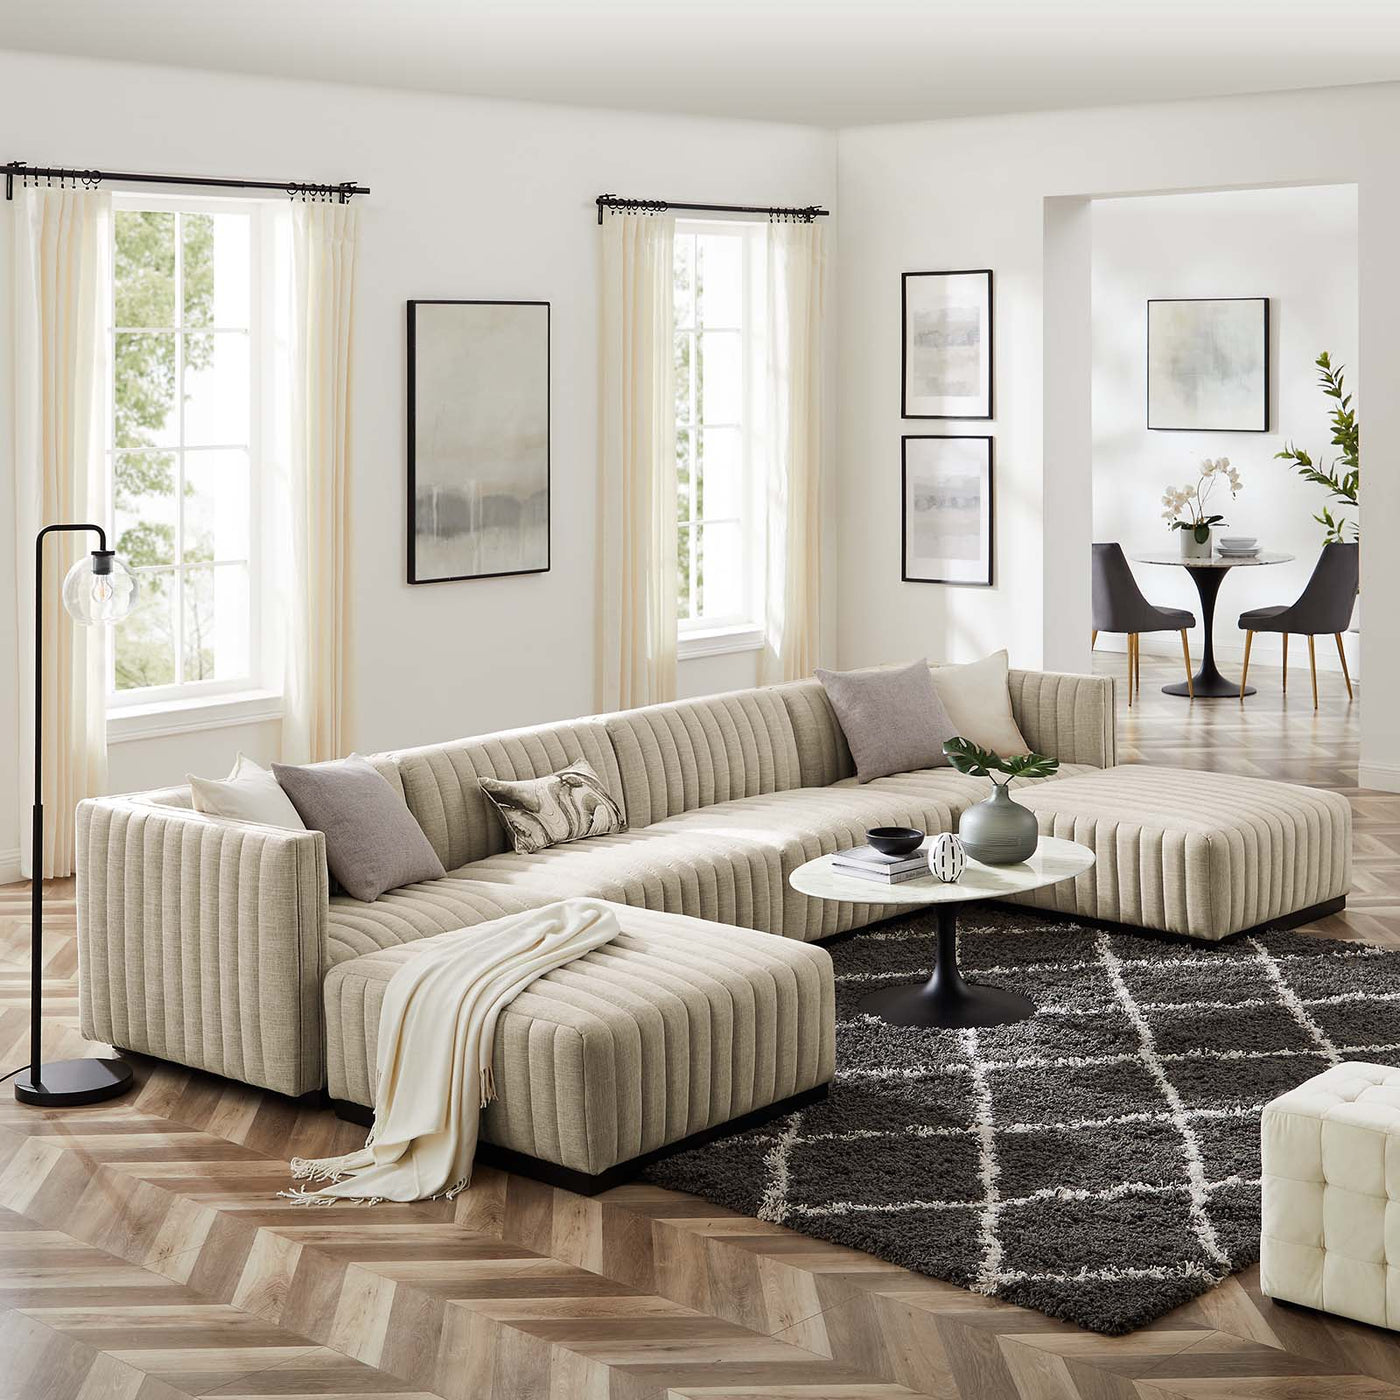 modern tufted sectional sofa